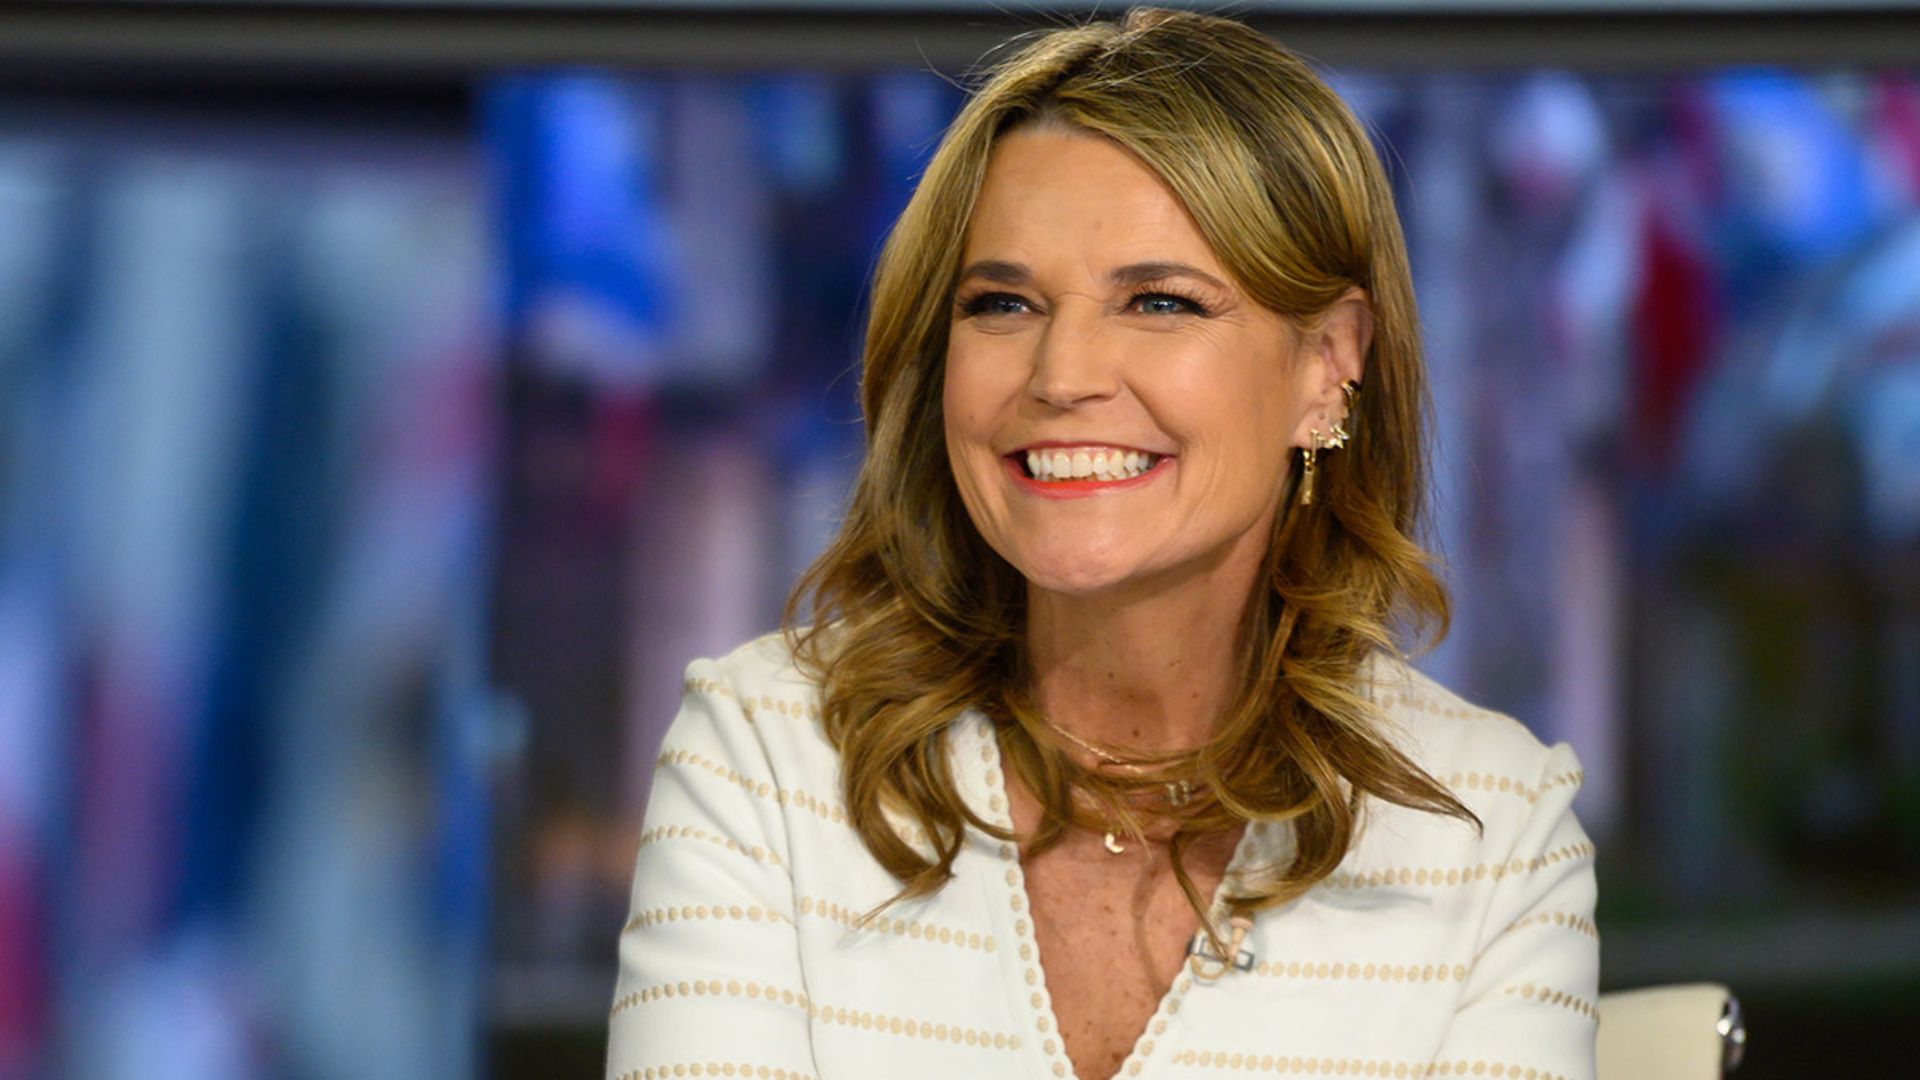 Savannah Guthrie's departure from Today in NY results in emotional